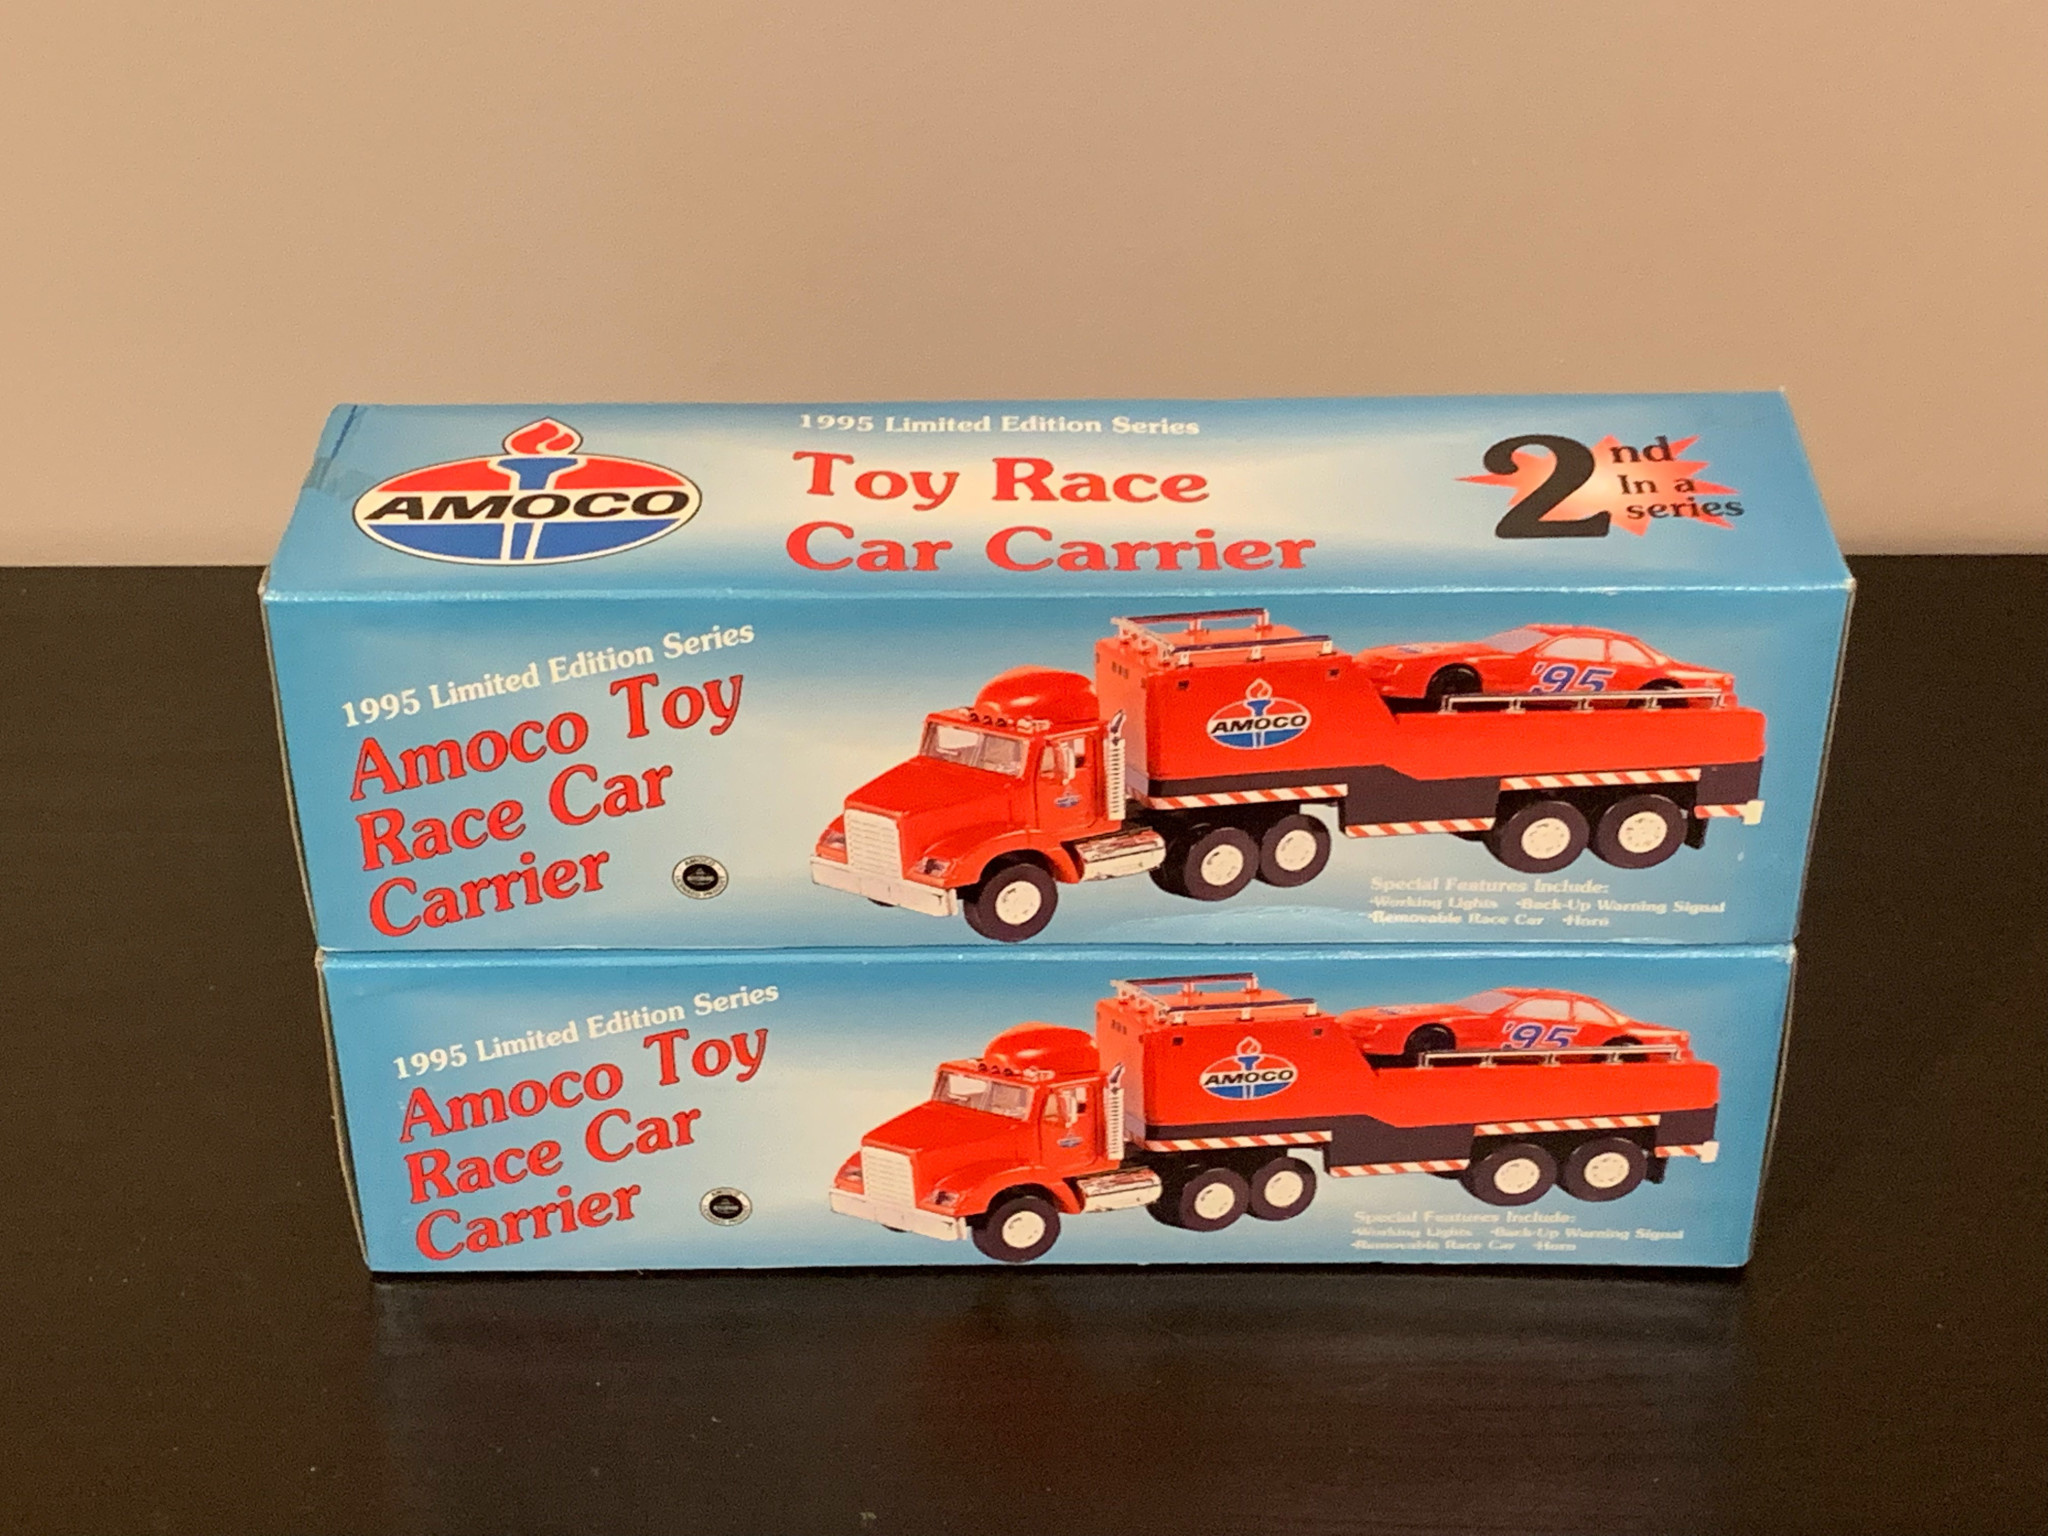 1995 Amoco Toy Race Car Carrier 2nd Edition